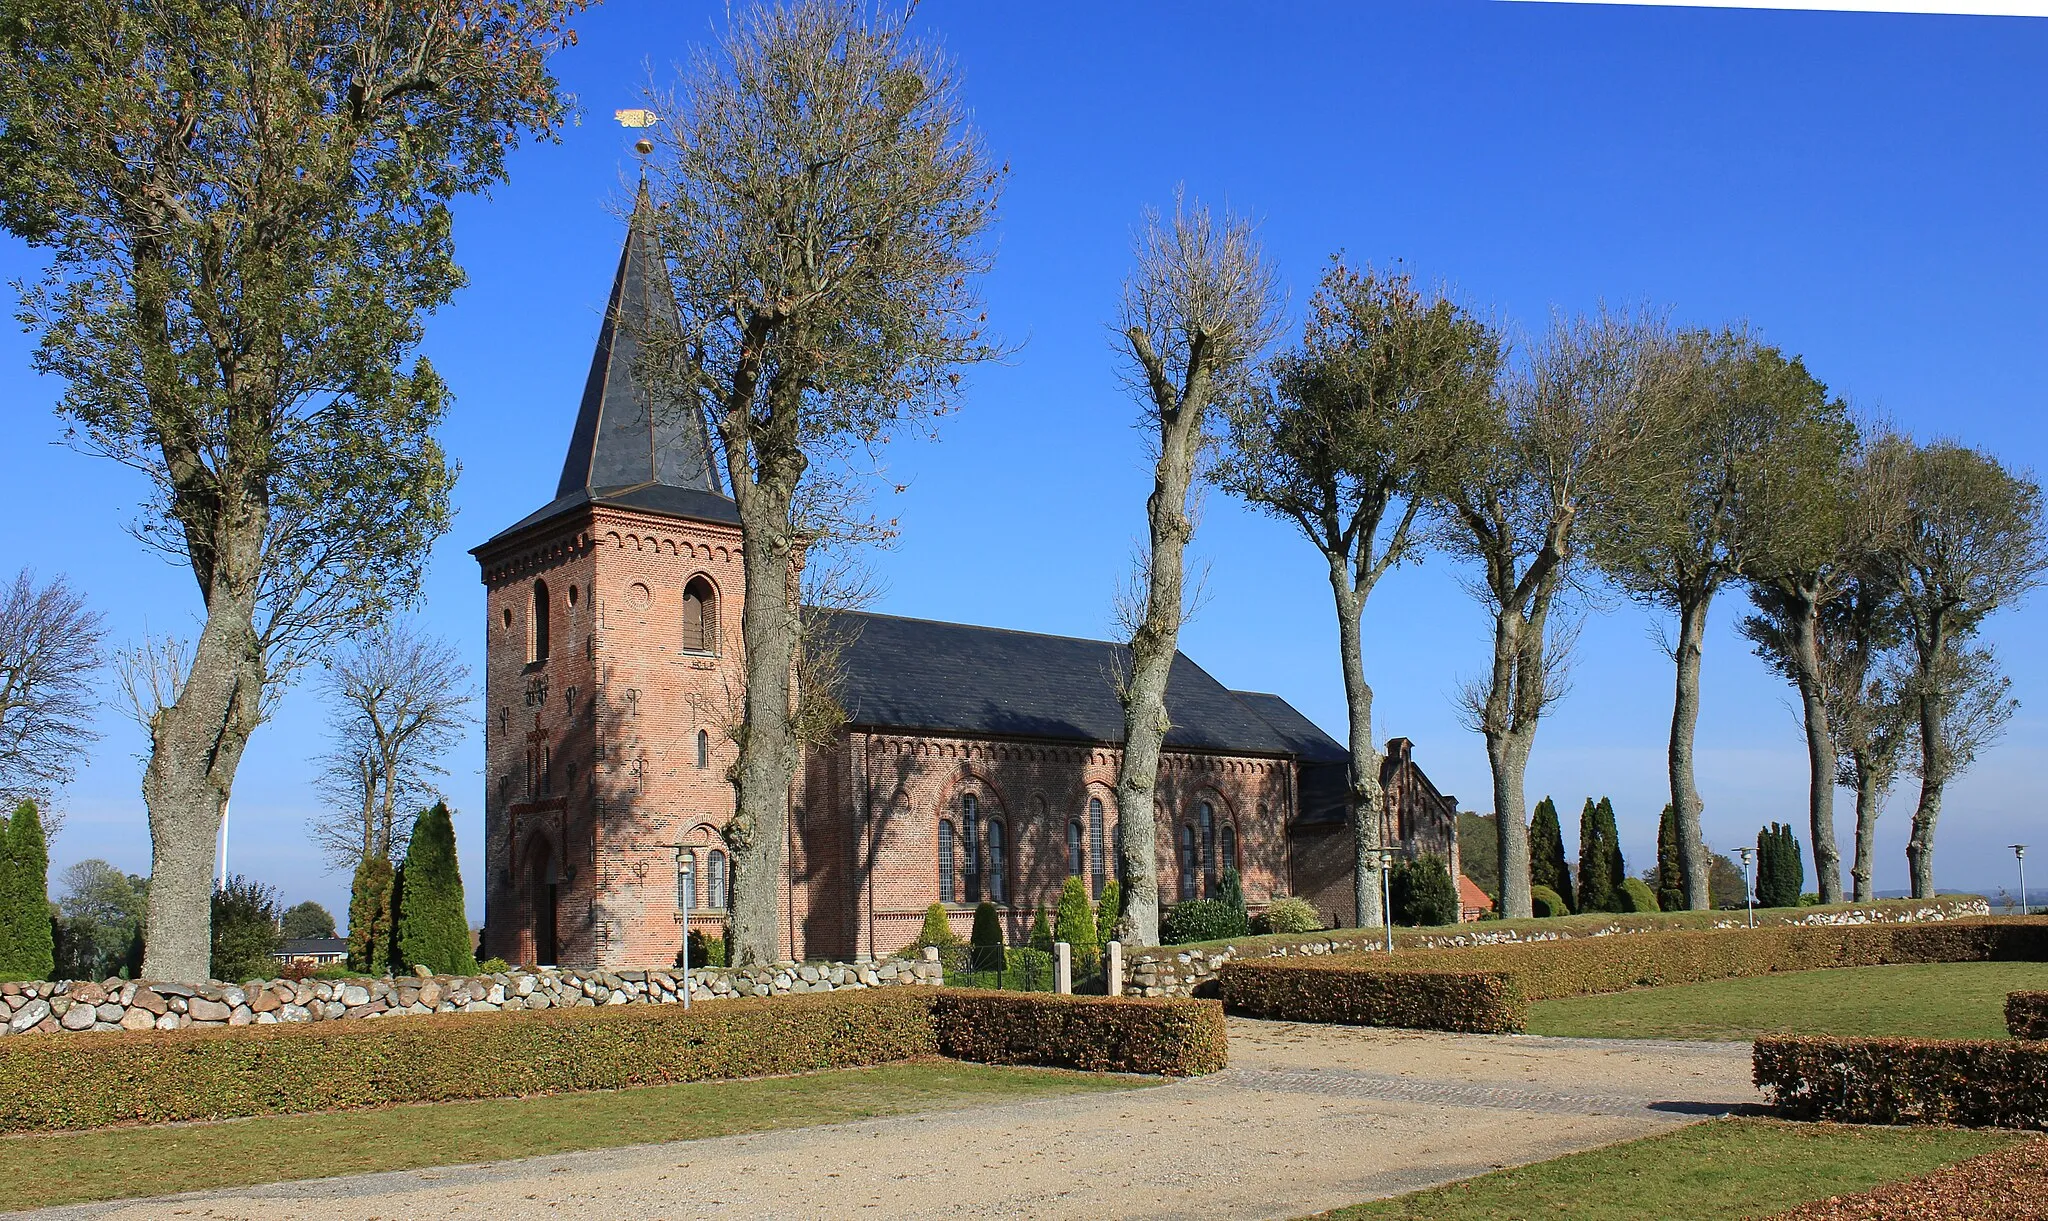 Photo showing: Dalby Kirke church was built by royal constructions LA Winstrup who also converted and newly built other churches in the Kolding 's outskirts. The church is
built of red brick on a solid granite base and is listed in mostly Romanesque and Gothic style. On 12 October 1873, the church was consecrated by the Vicar M. Mørk Hansen. The church was refurbished in 1971 and 1998-99.